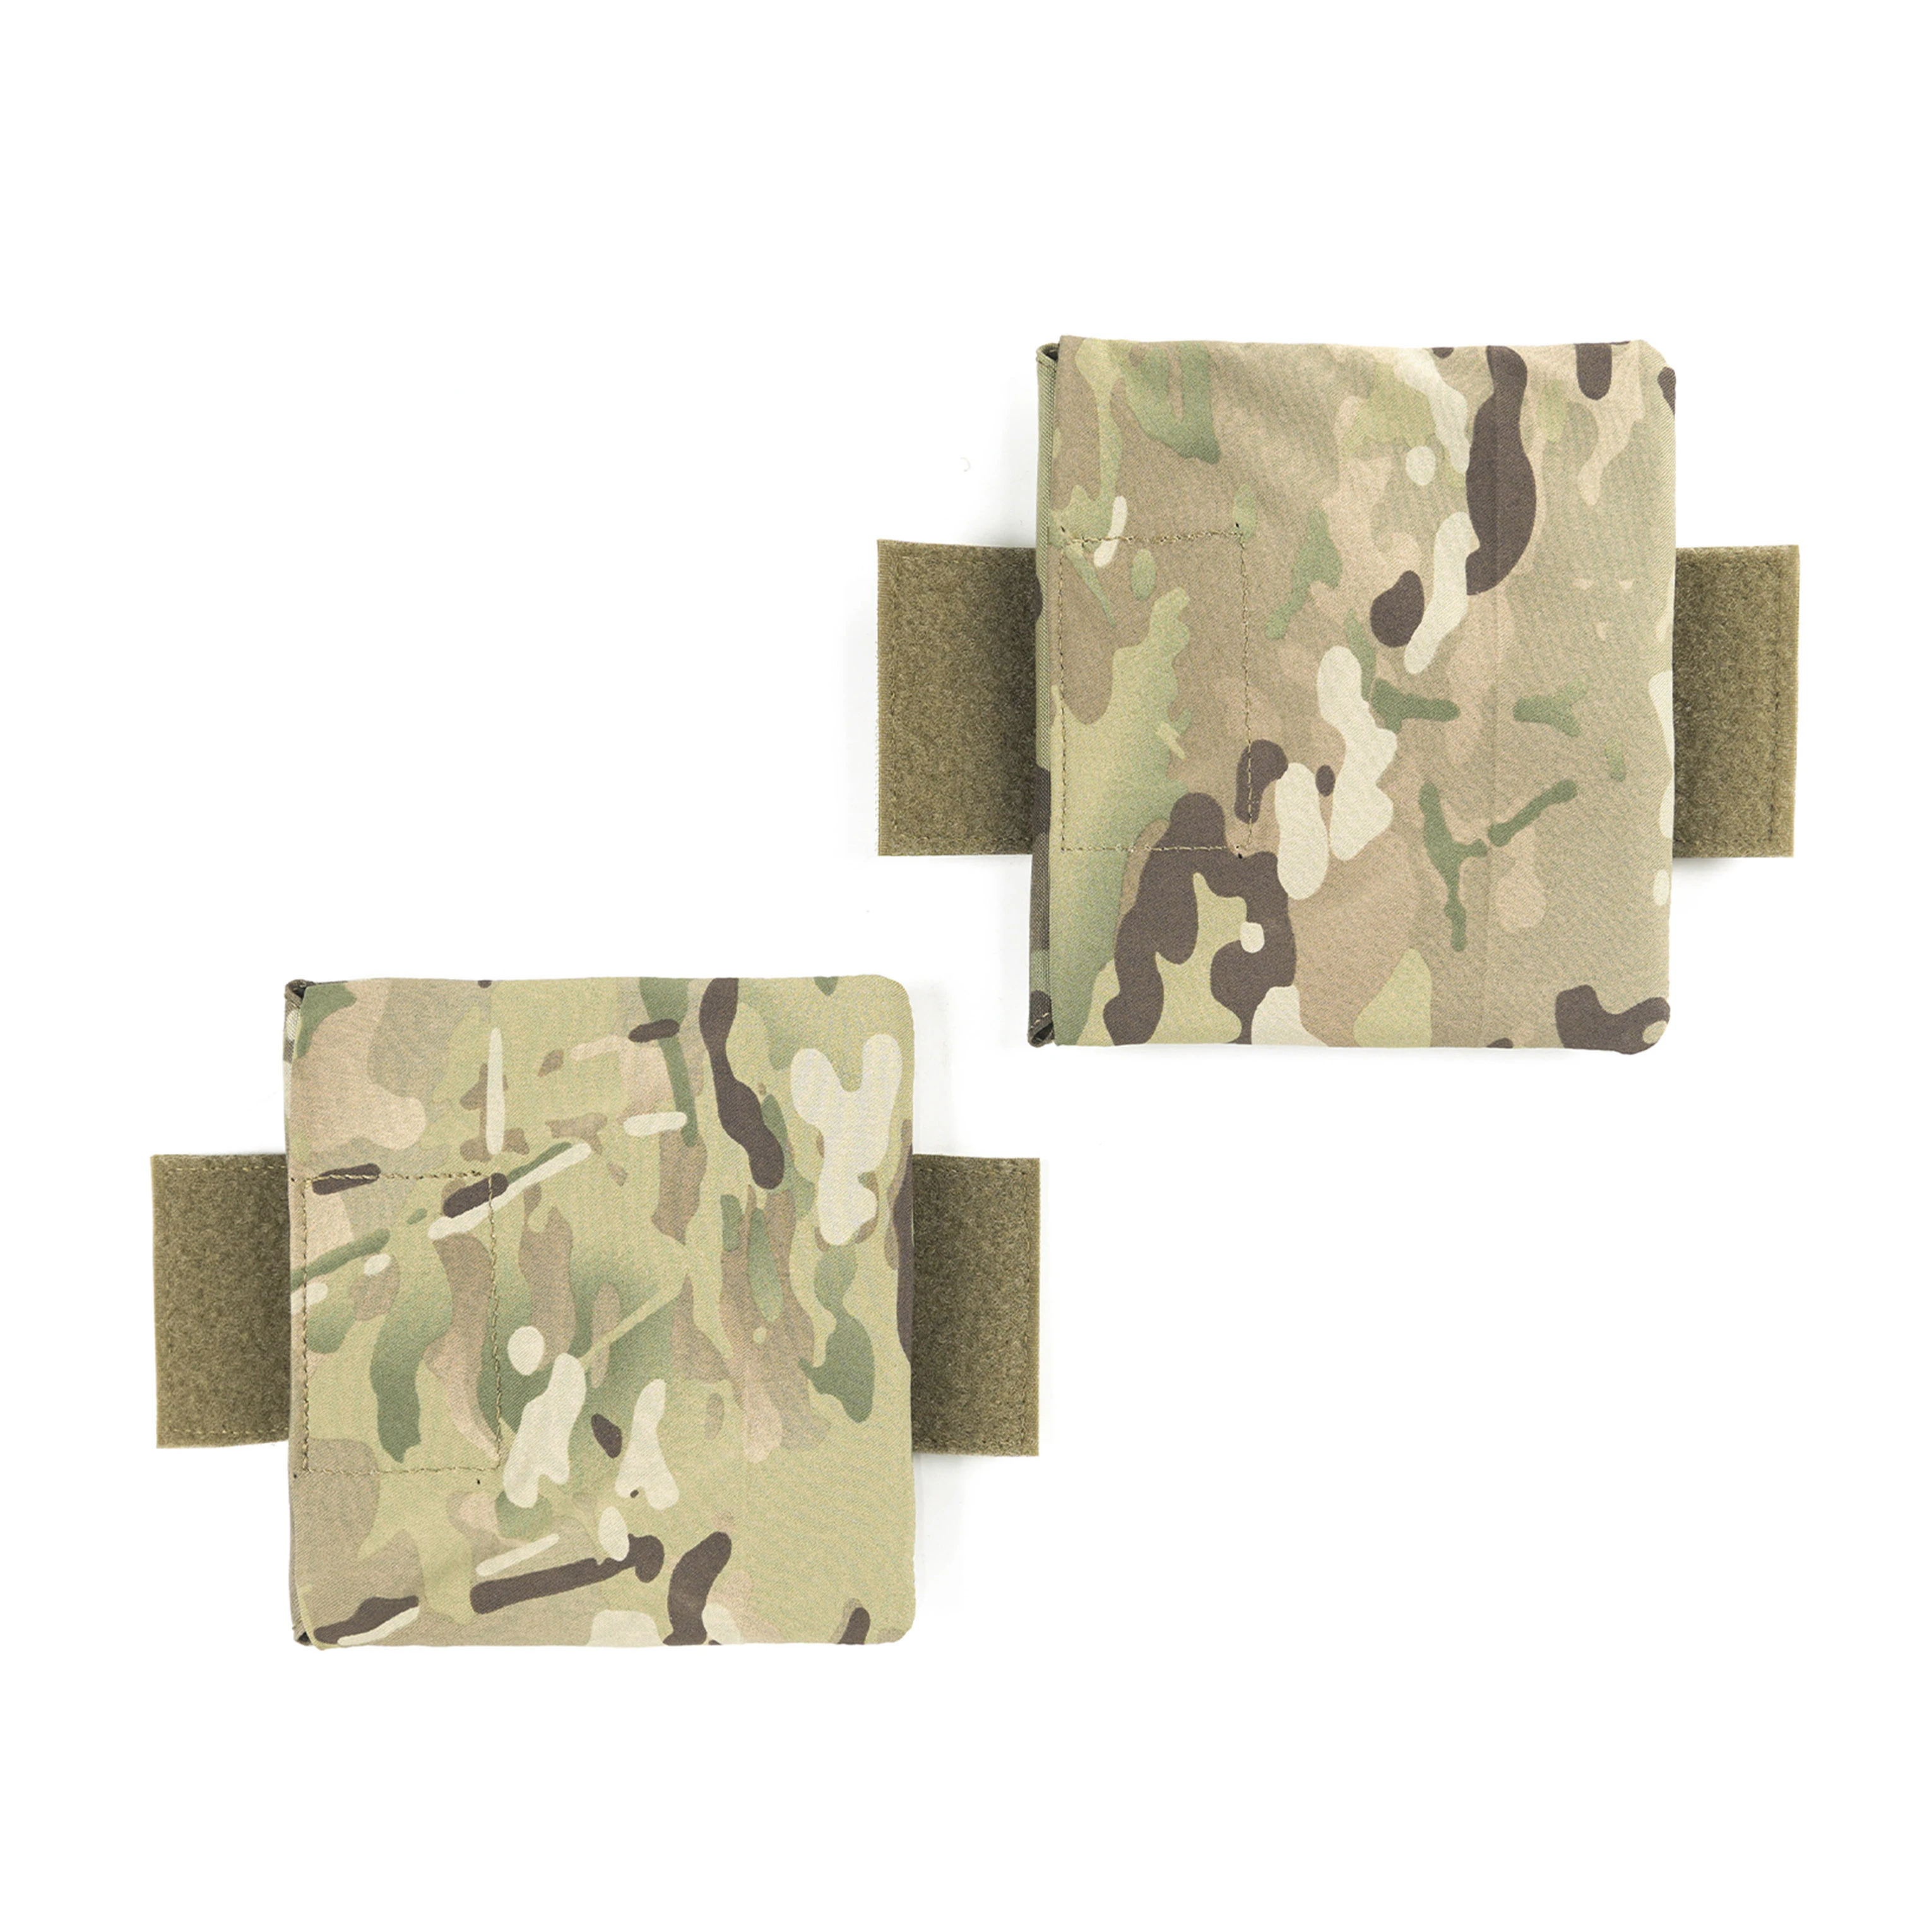 

Tactical Gear Side Plate Pockets for Cummerbund Airsoft Military Equipment Accessories Ferro Style 6X6 War Game Outdoor Hunting